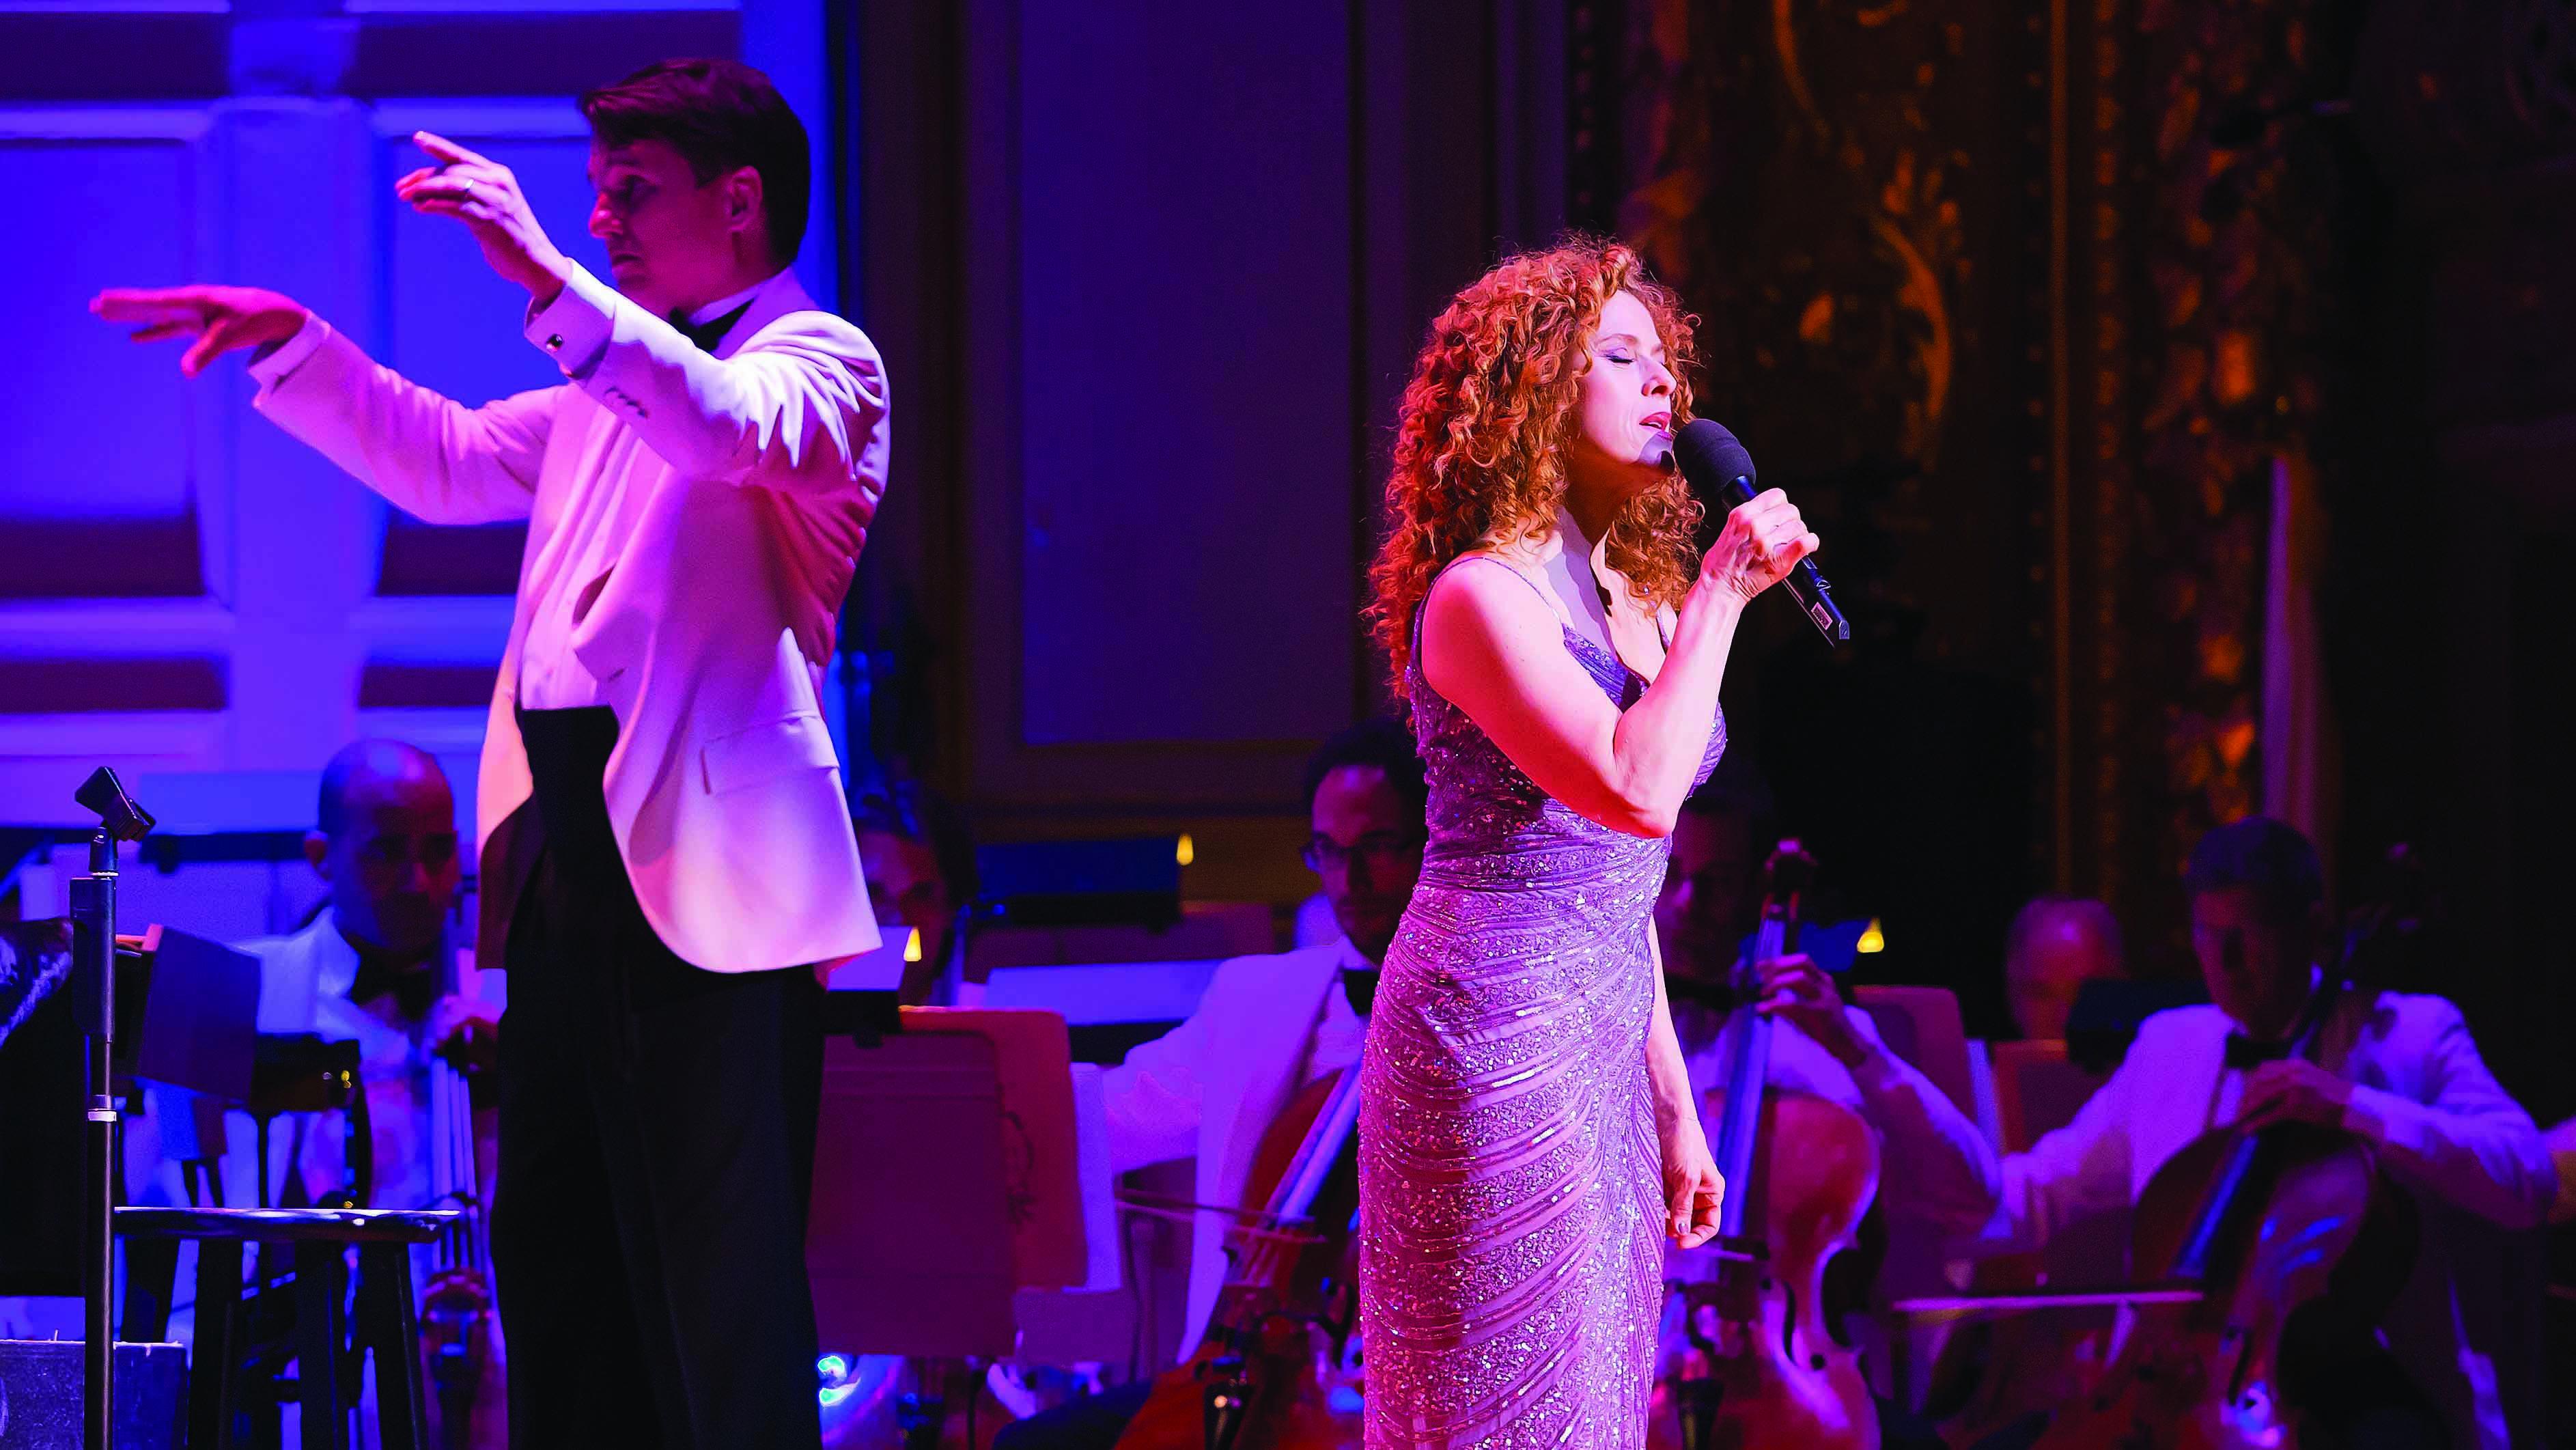 Bernadette Peters performs with the Boston Pops, reprising Broadway hits and American classics. (Courtesy of Winslow Townson)